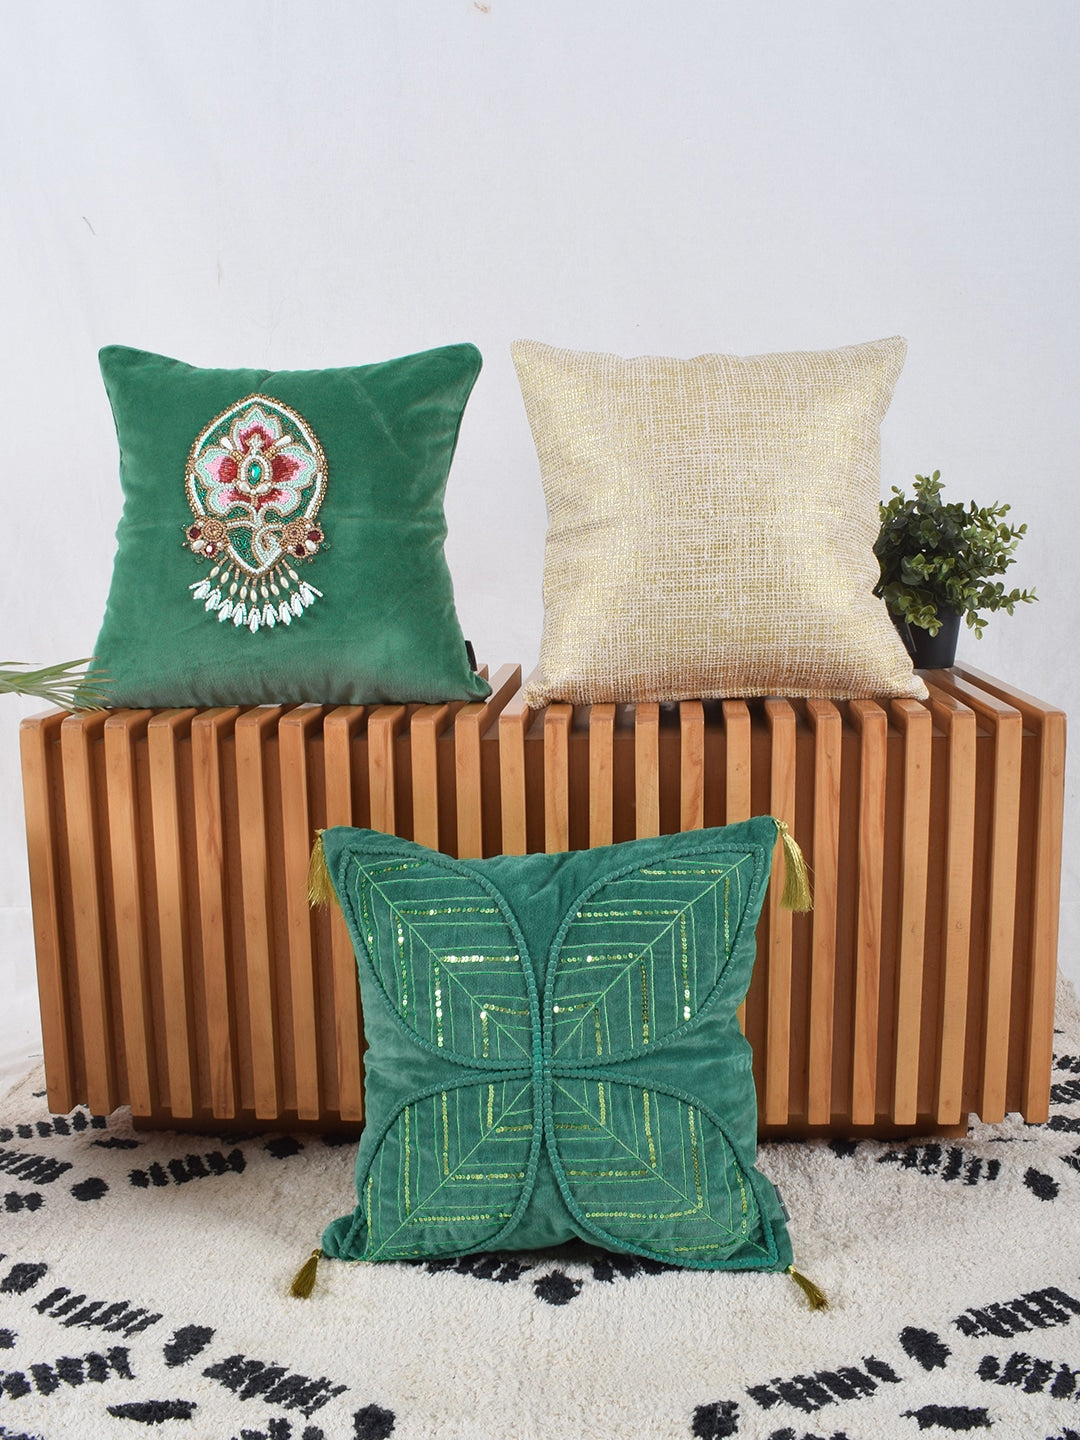 Blanc9 Set of 3 Embroidered Green Golden 40x40 CM Cushion covers